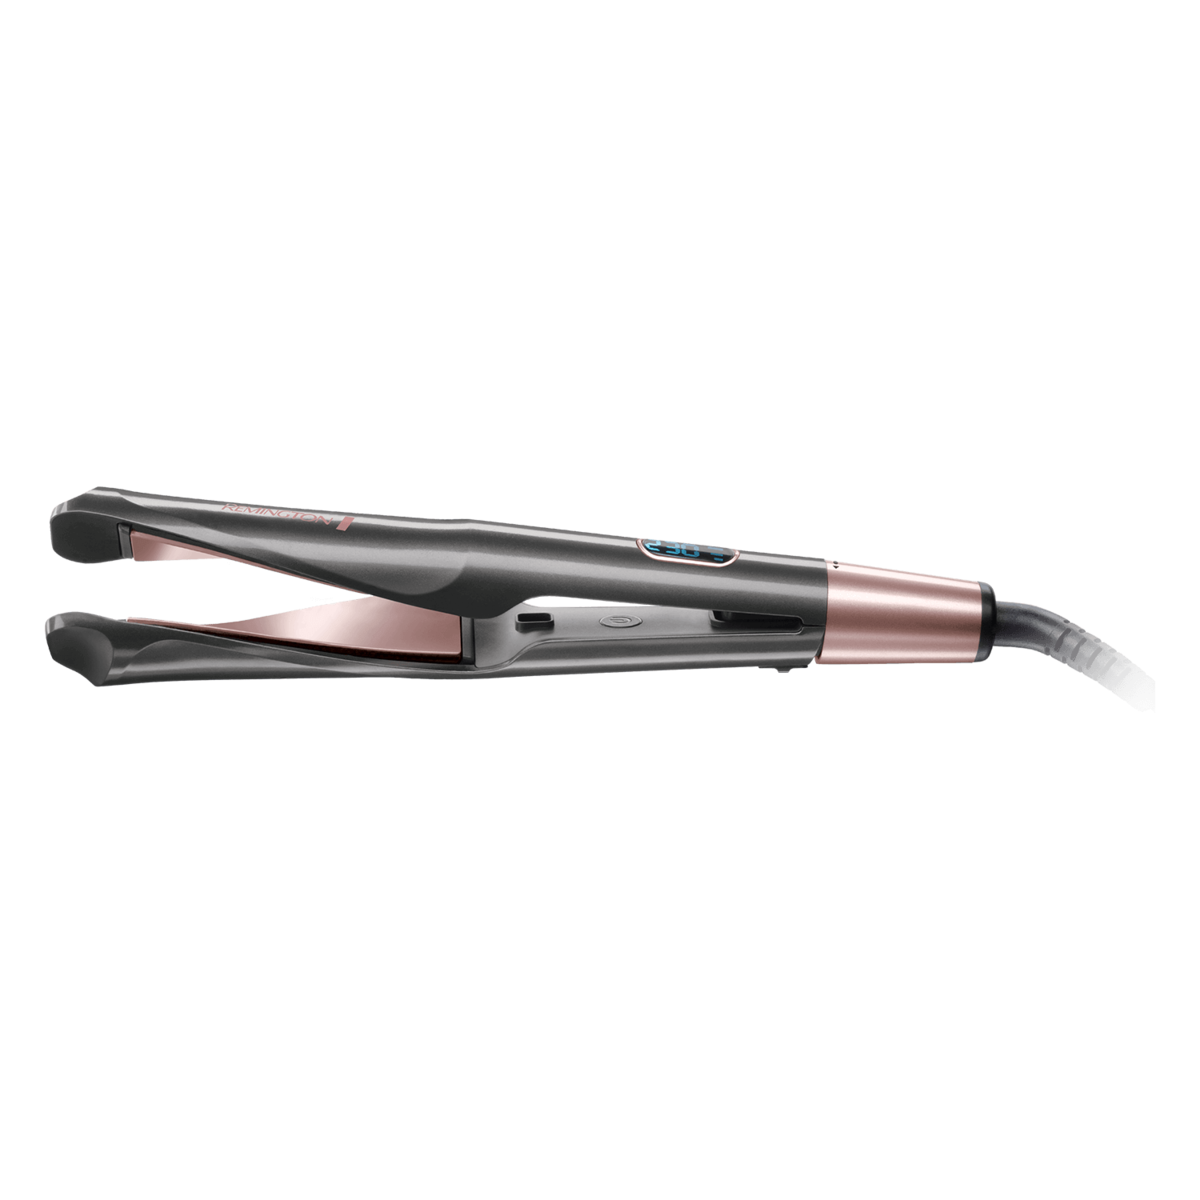 REMINGTON S6606-Hair Straightener-2 In 1 Curl And Wave